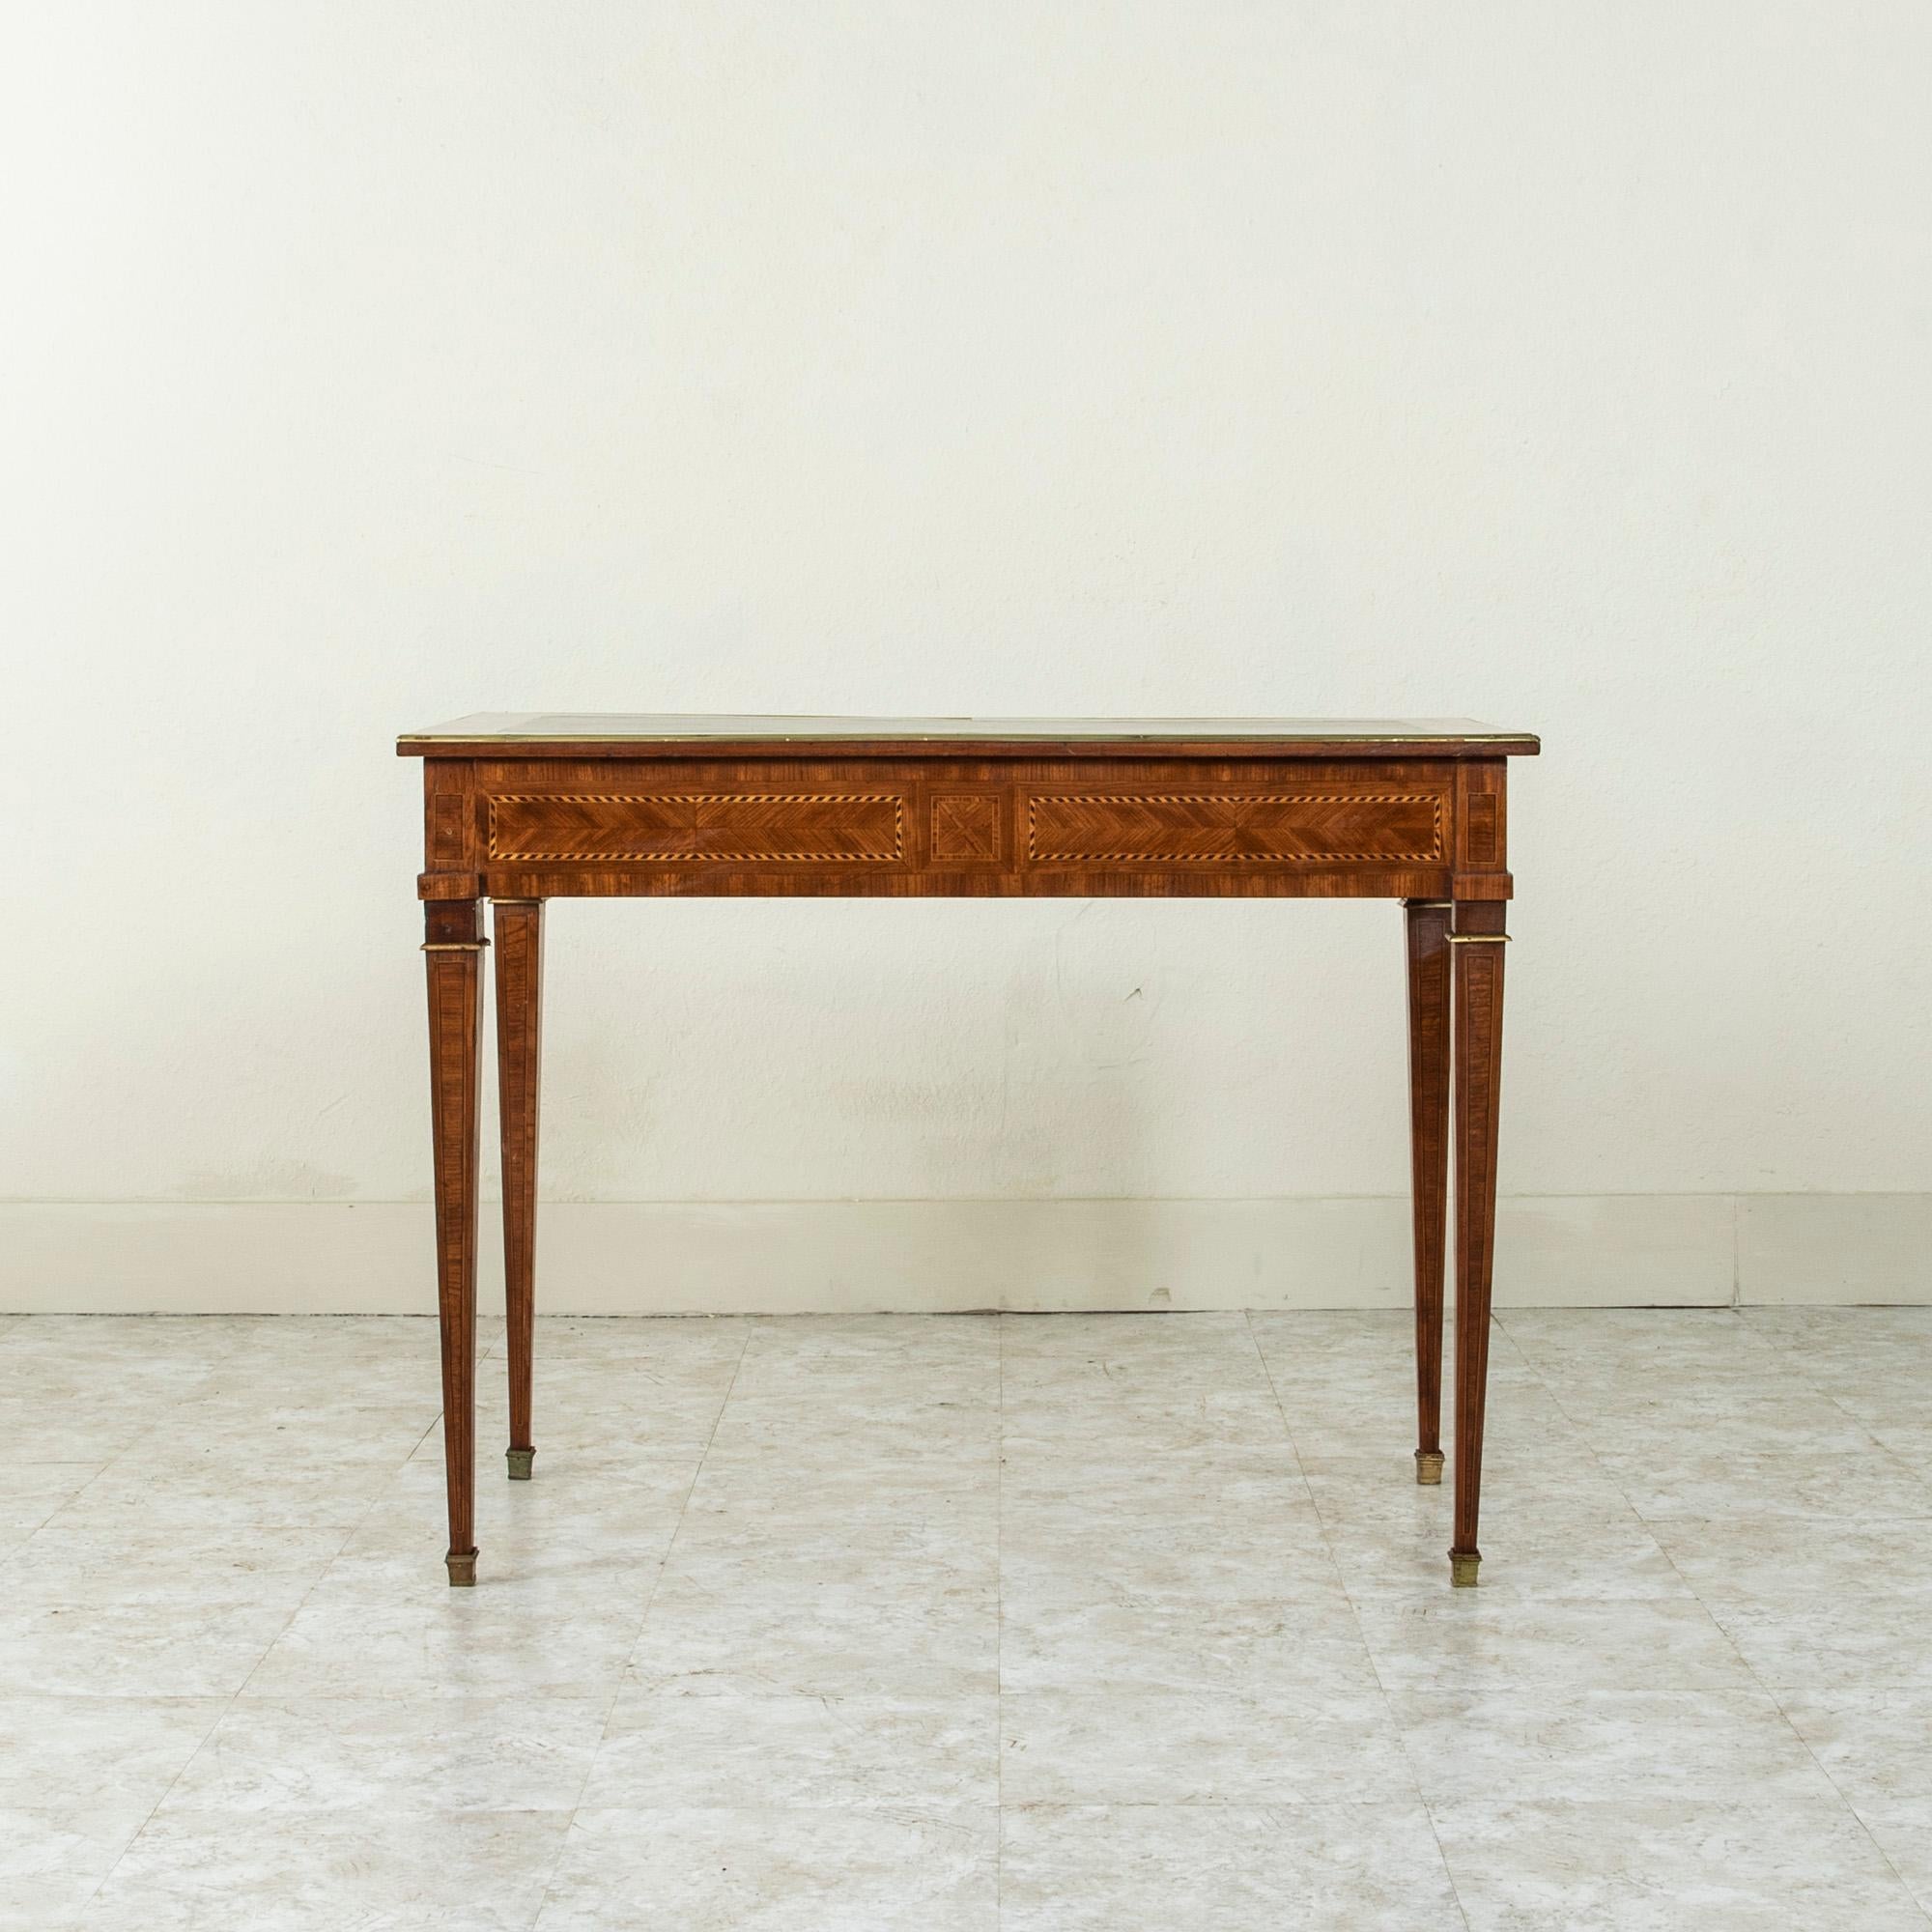 Pearwood Late 18th Century French Louis XVI Period Marquetry Desk with Leather Top